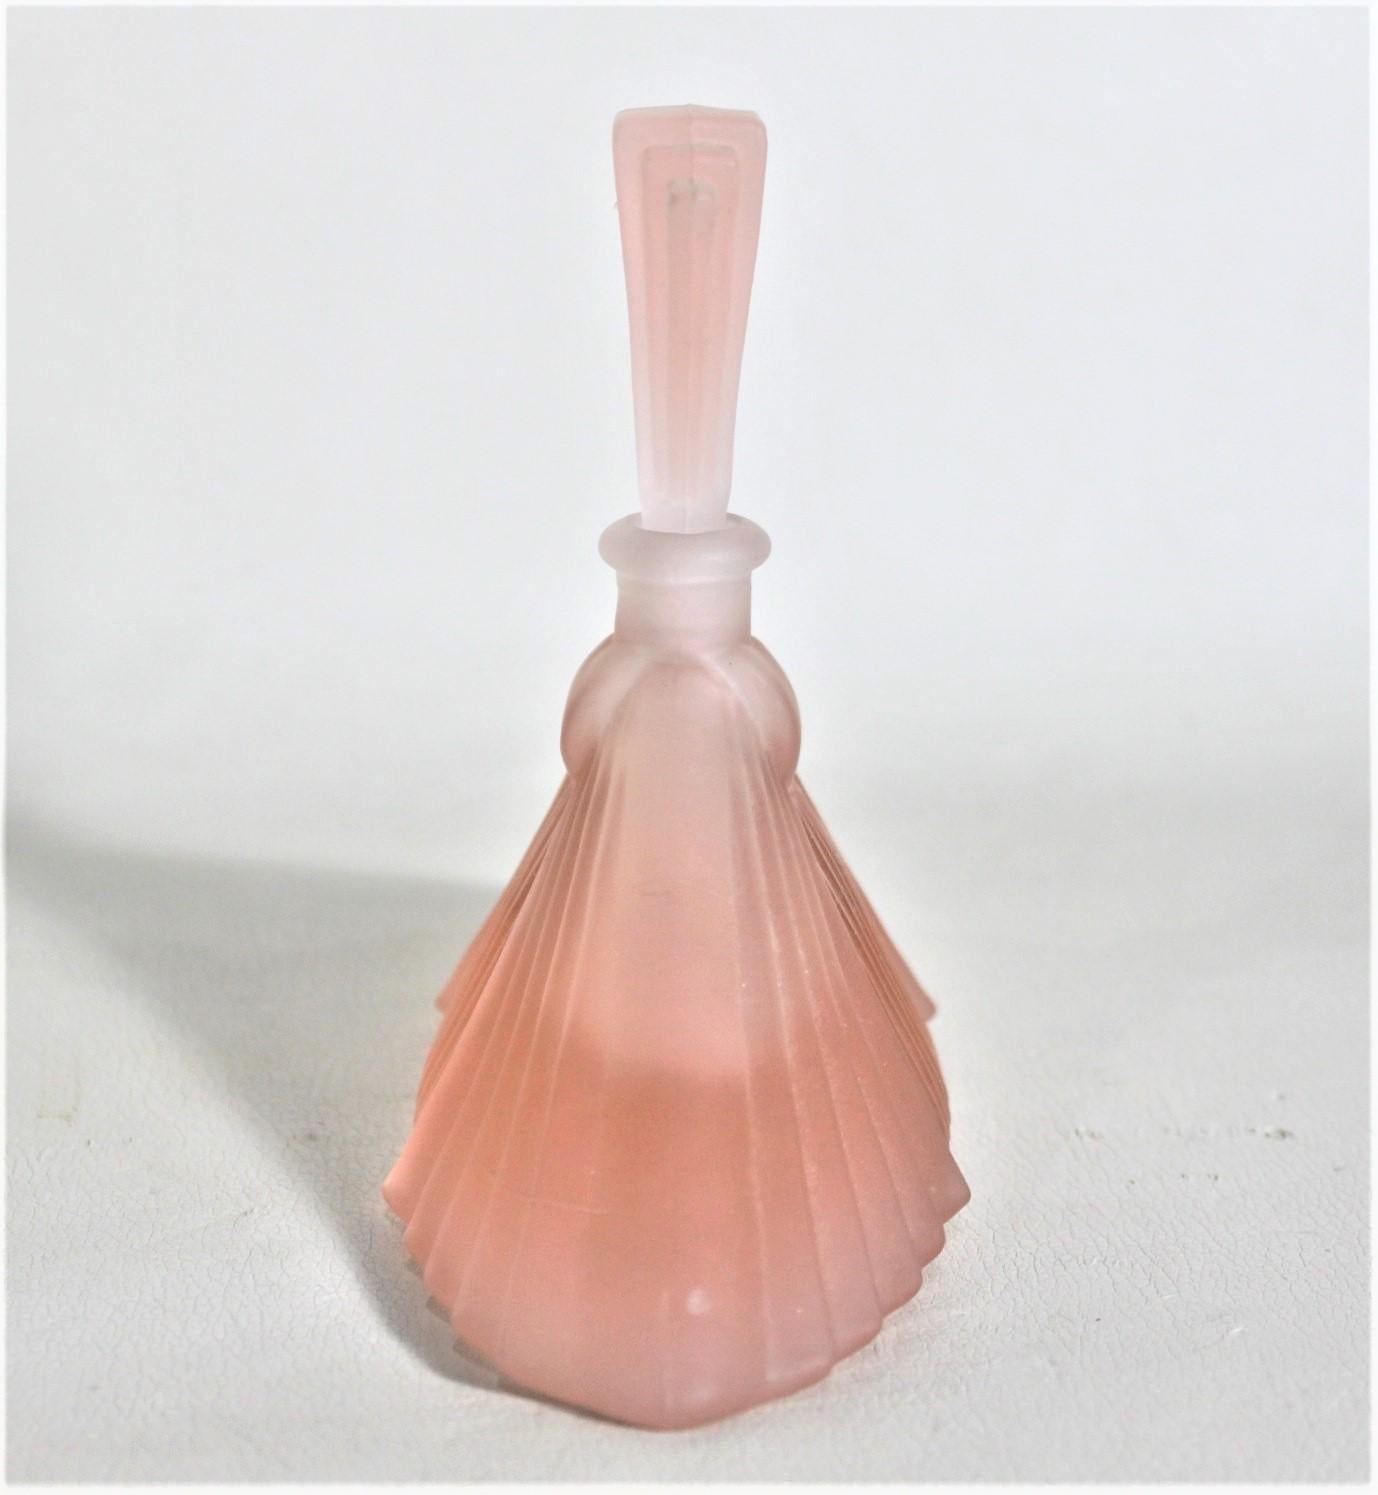 Antique Art Deco Frosted Pink Perfume or Scent Bottle In Good Condition For Sale In Hamilton, Ontario